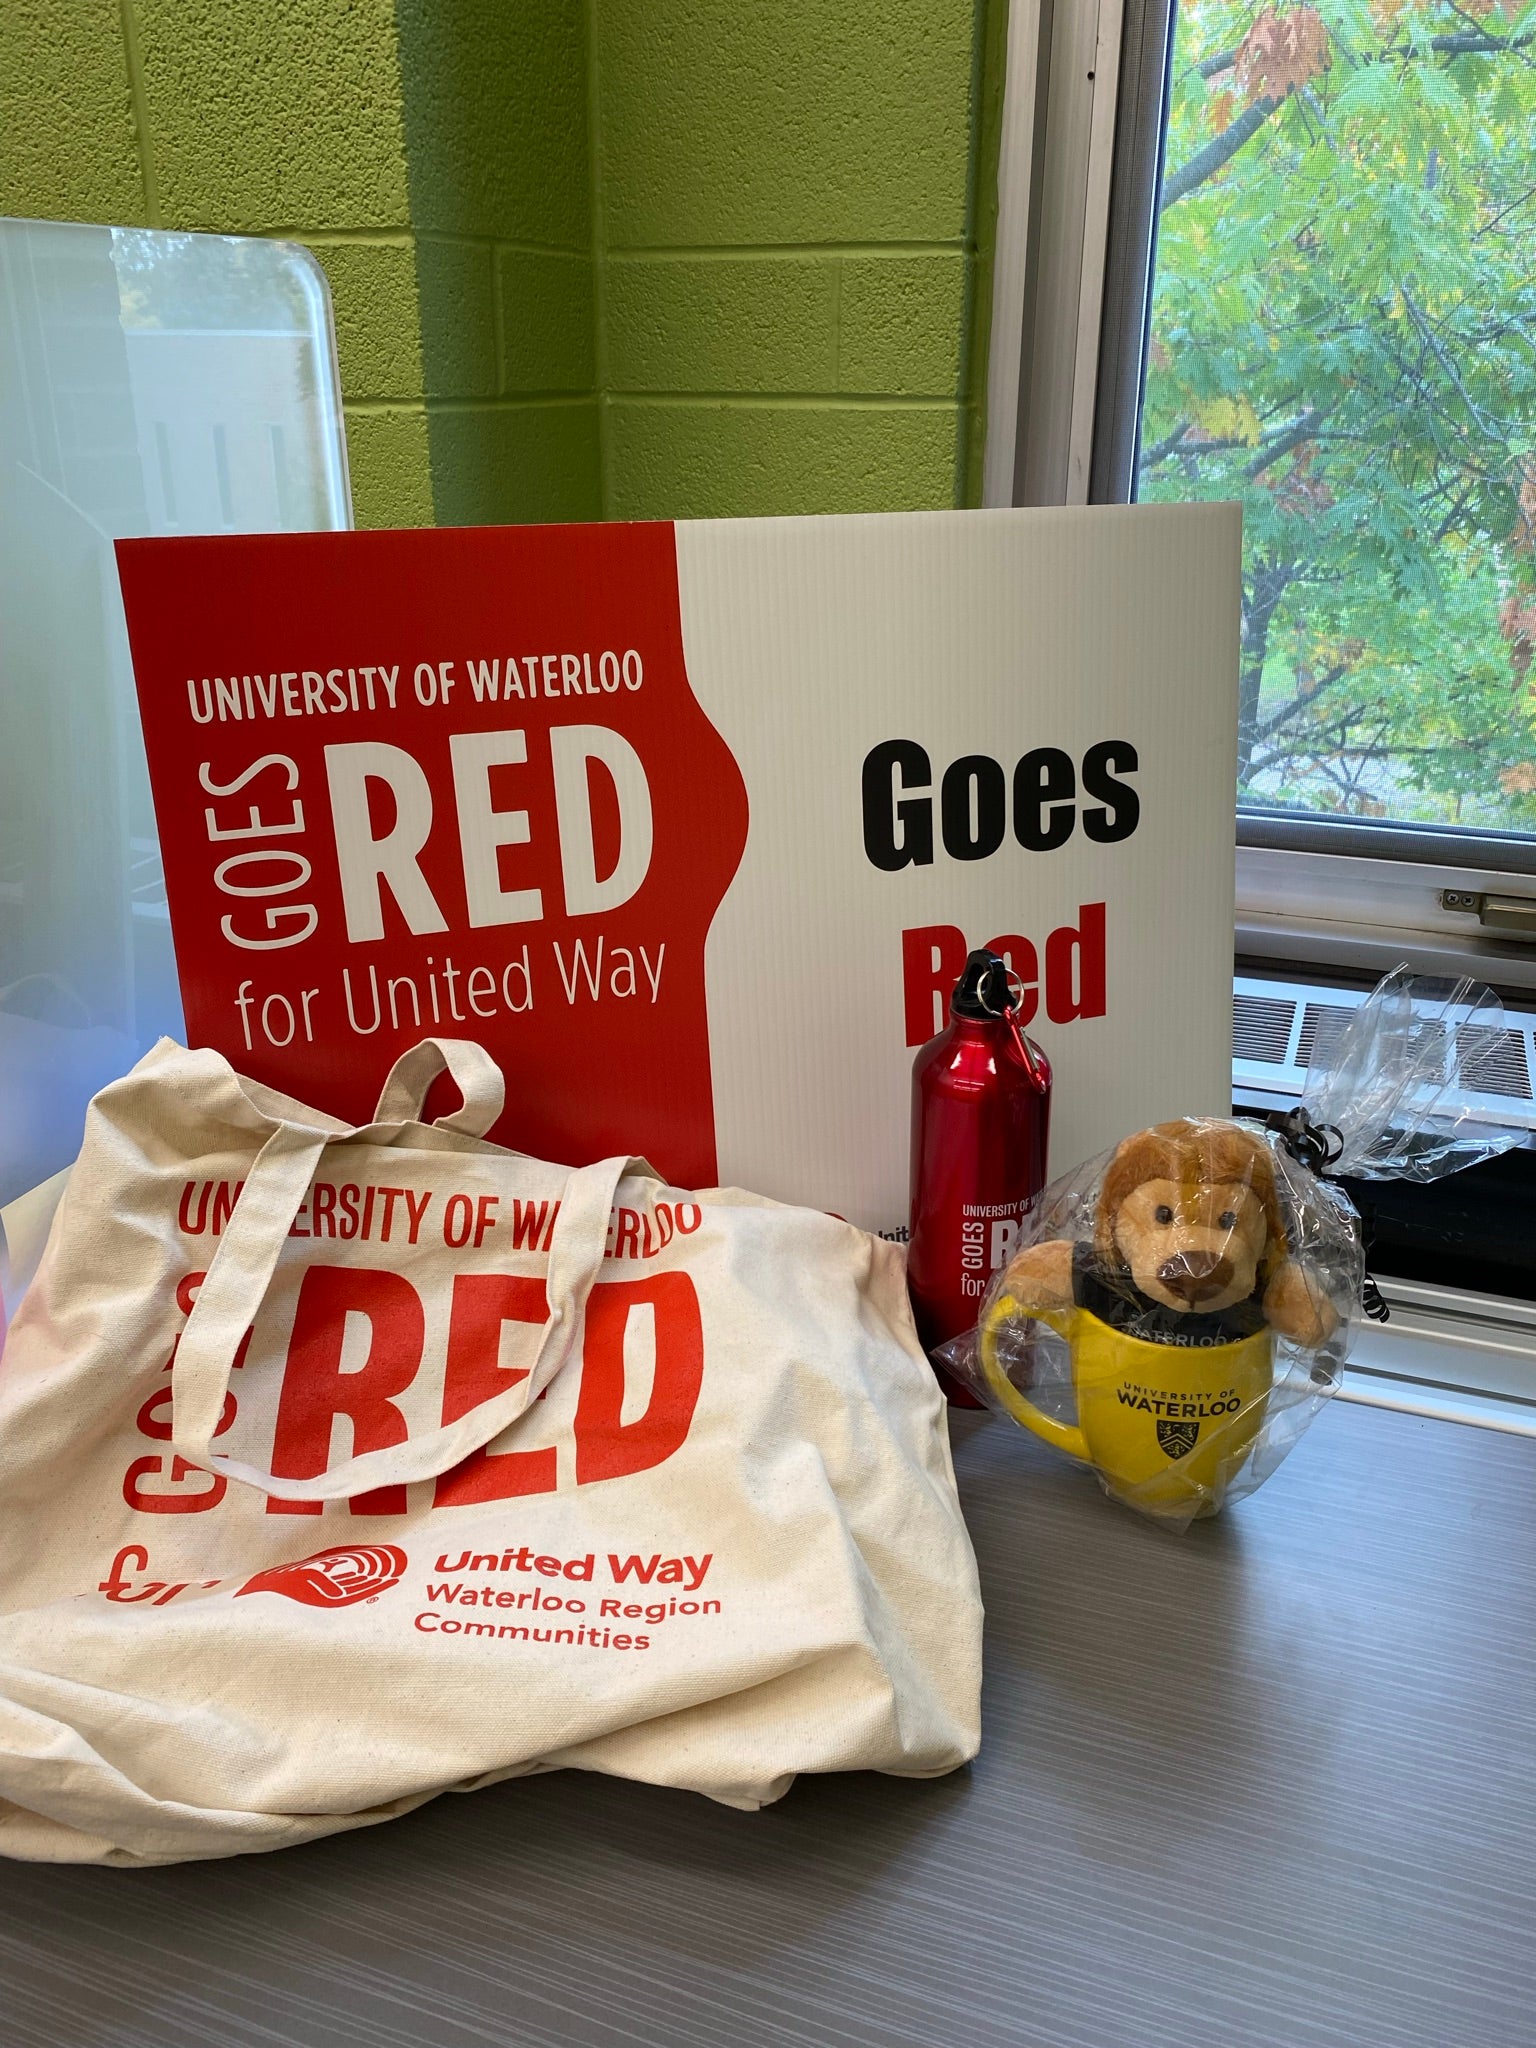  a UW mug witha stuffed UW mascot plushie, and a United Way Camapign tote bag and water bottle